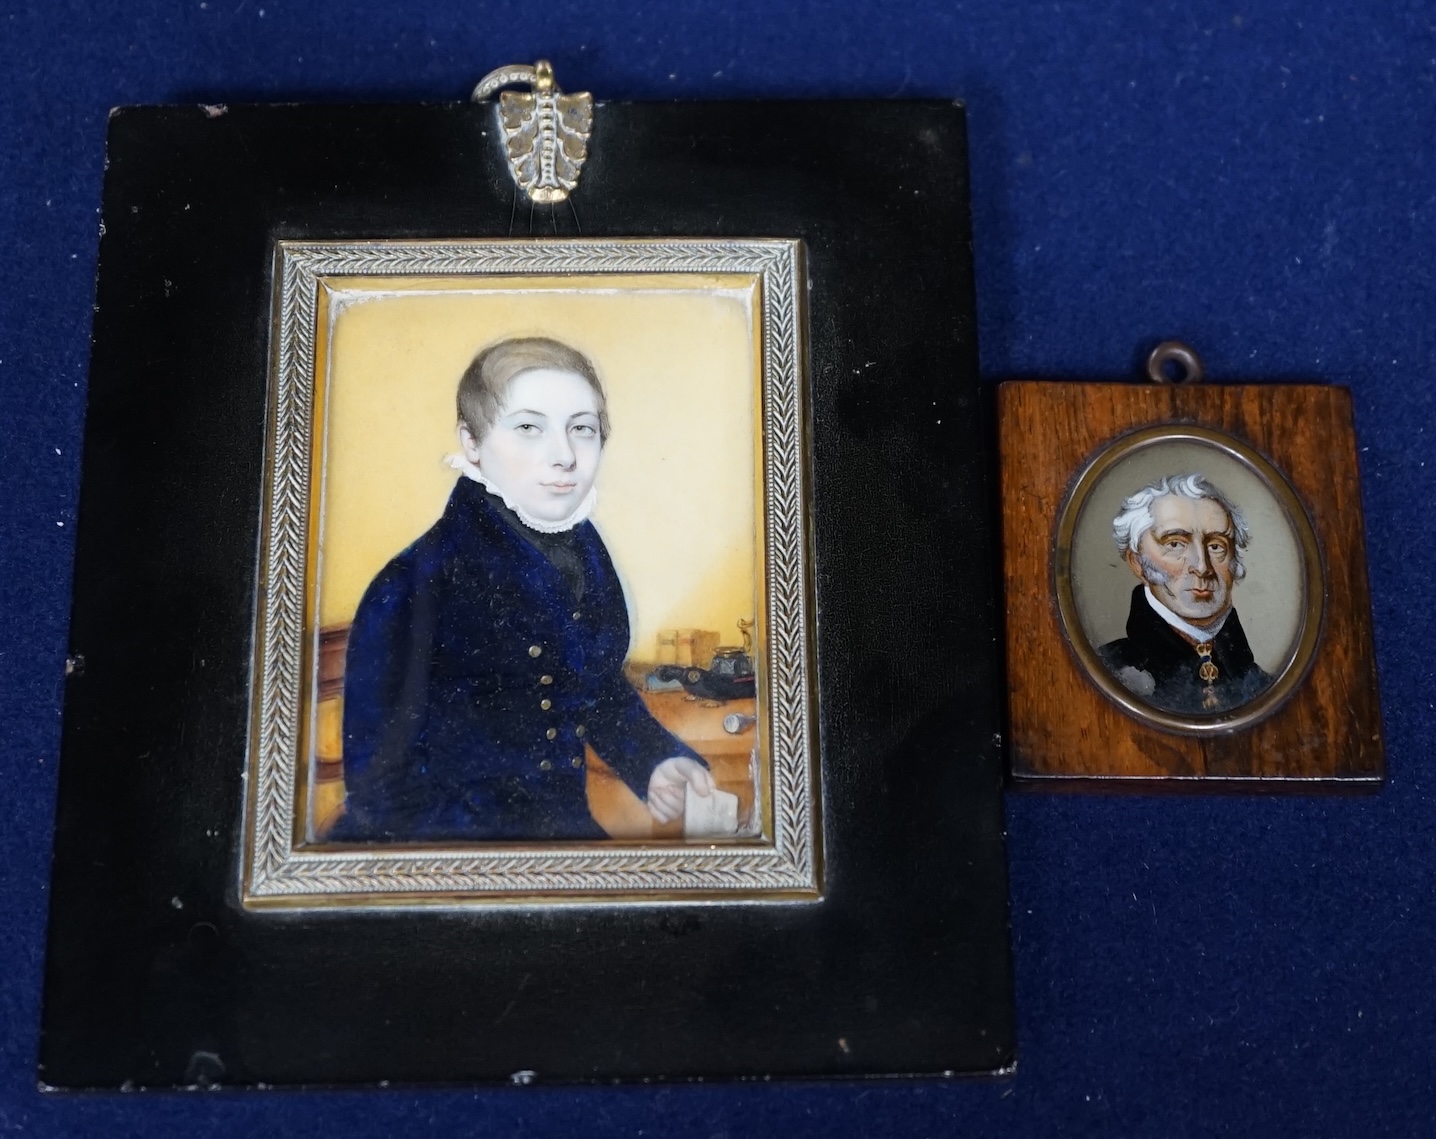 Walter Stephens Lethbridge (1771-c.1831), portrait miniature of Robert Penleigh Colson, aged 13 years, 15th January 1821/1827, watercolour on ivory, inscribed verso, together with a reverse glass painting of The Duke of